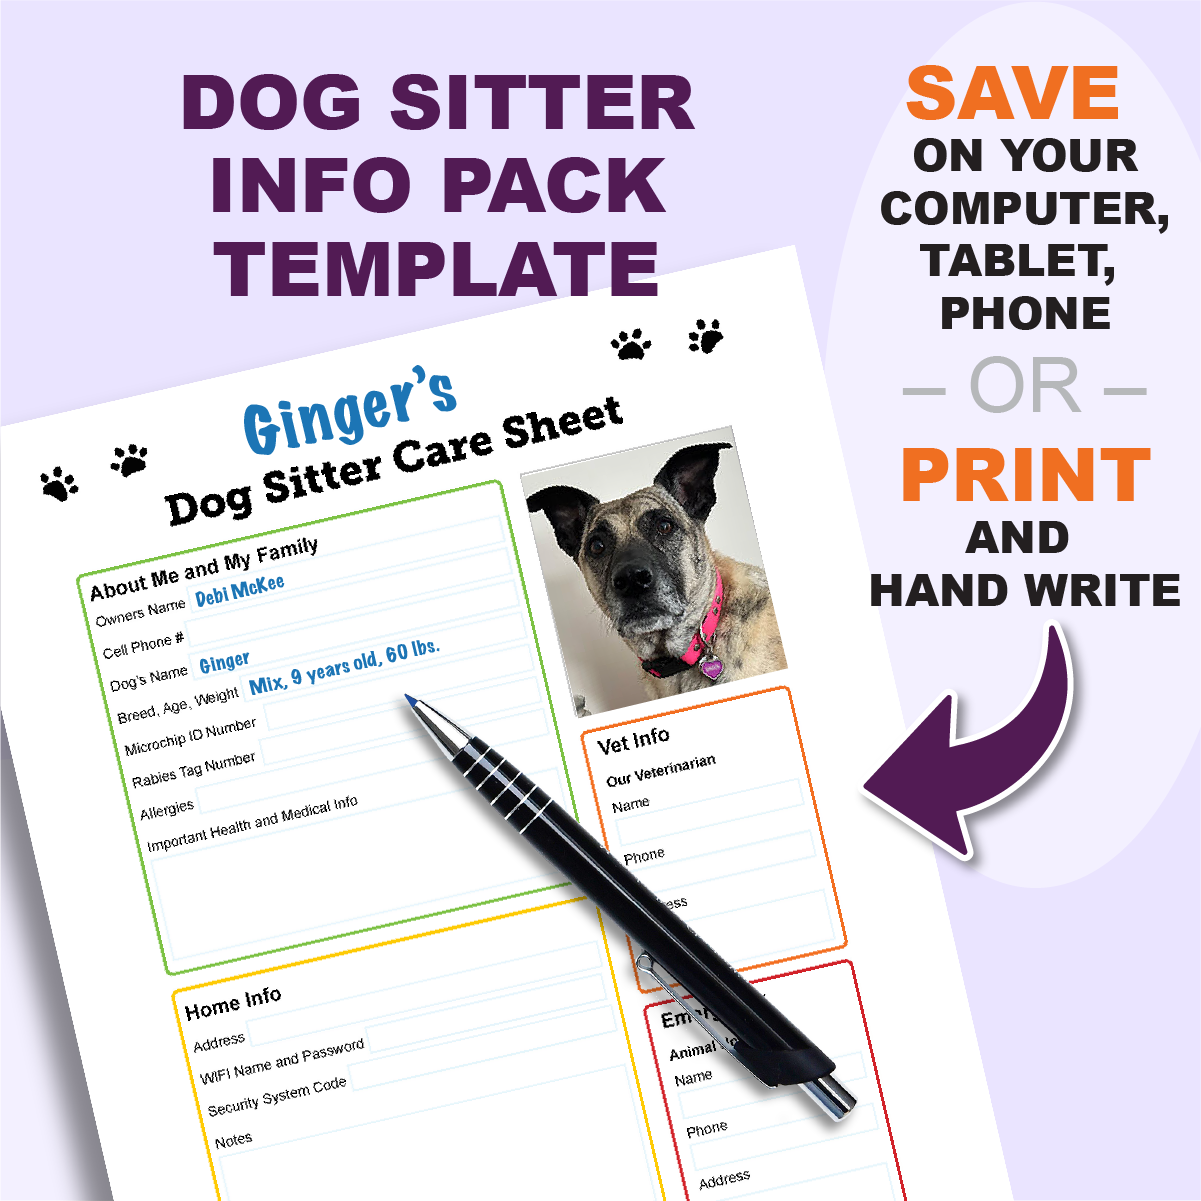 Dog sitter info pack template.